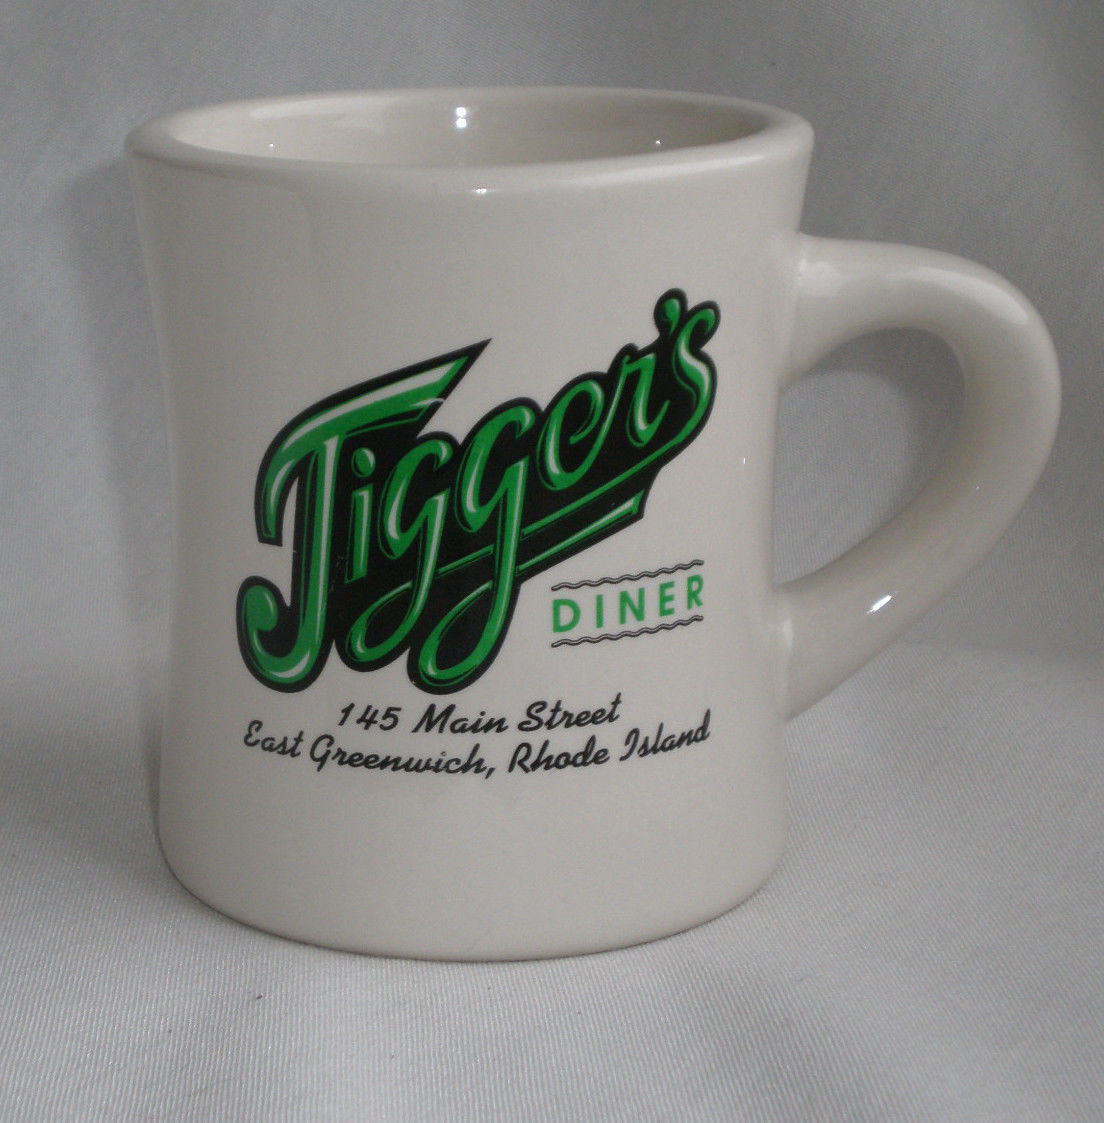 Jigger's - Mug

Credit: Len Arzoomanian ([The Magic World of Comet](http://www.61thriftpower.com "The Magic World of Comet"))
